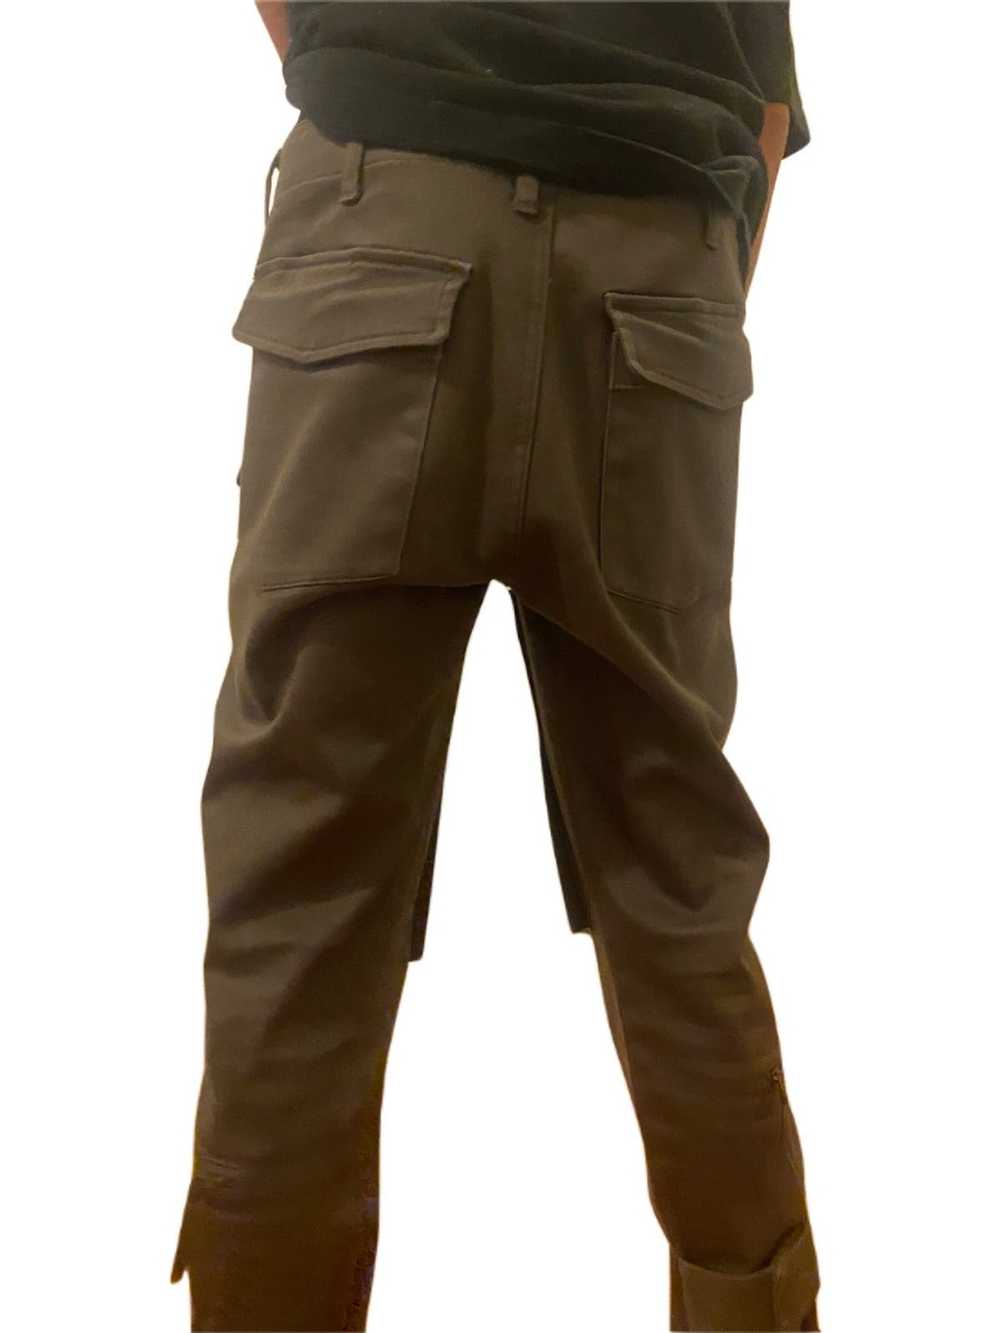 Undercover ☆RARE☆ UNDERCOVER 13AW zip cargo pants - image 3